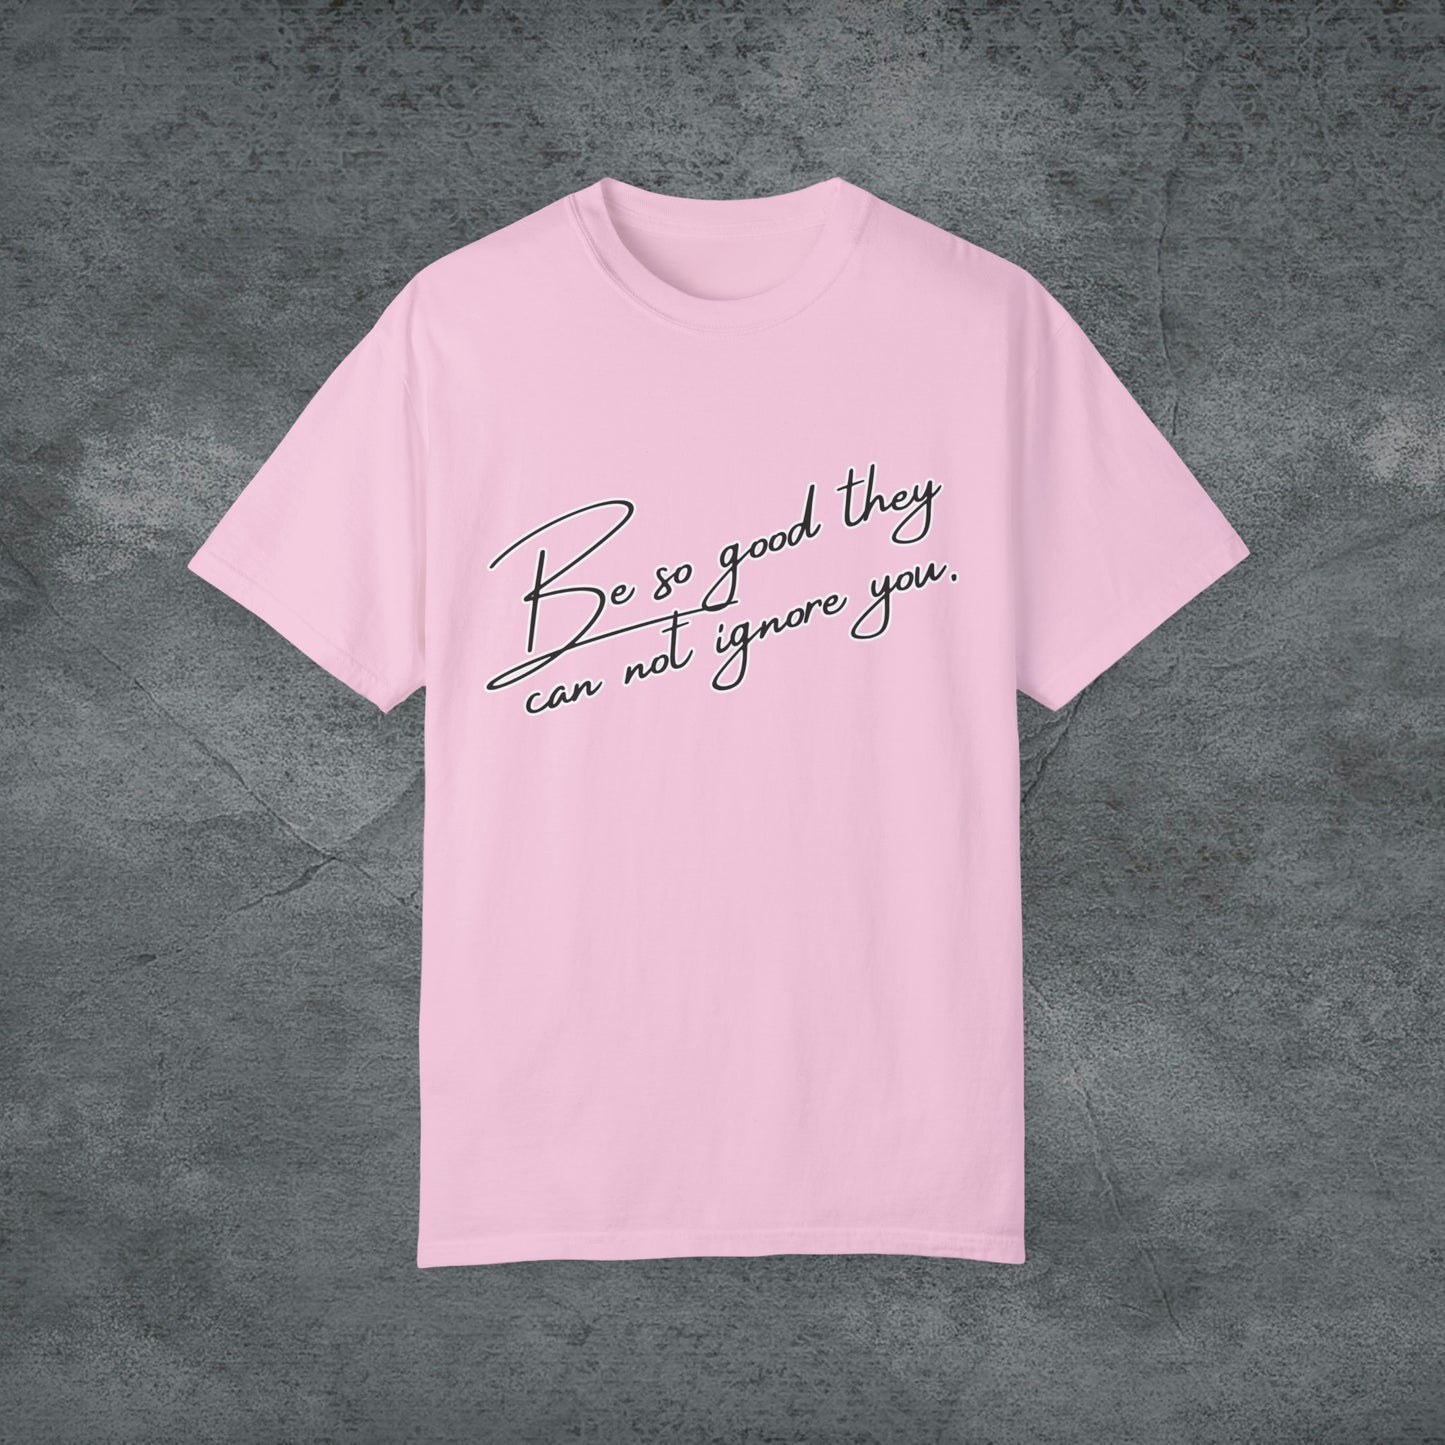 Be So Good They Can Not Ignore You - Motivational, Inspirational T-shirt USA T-Shirt Blossom S 